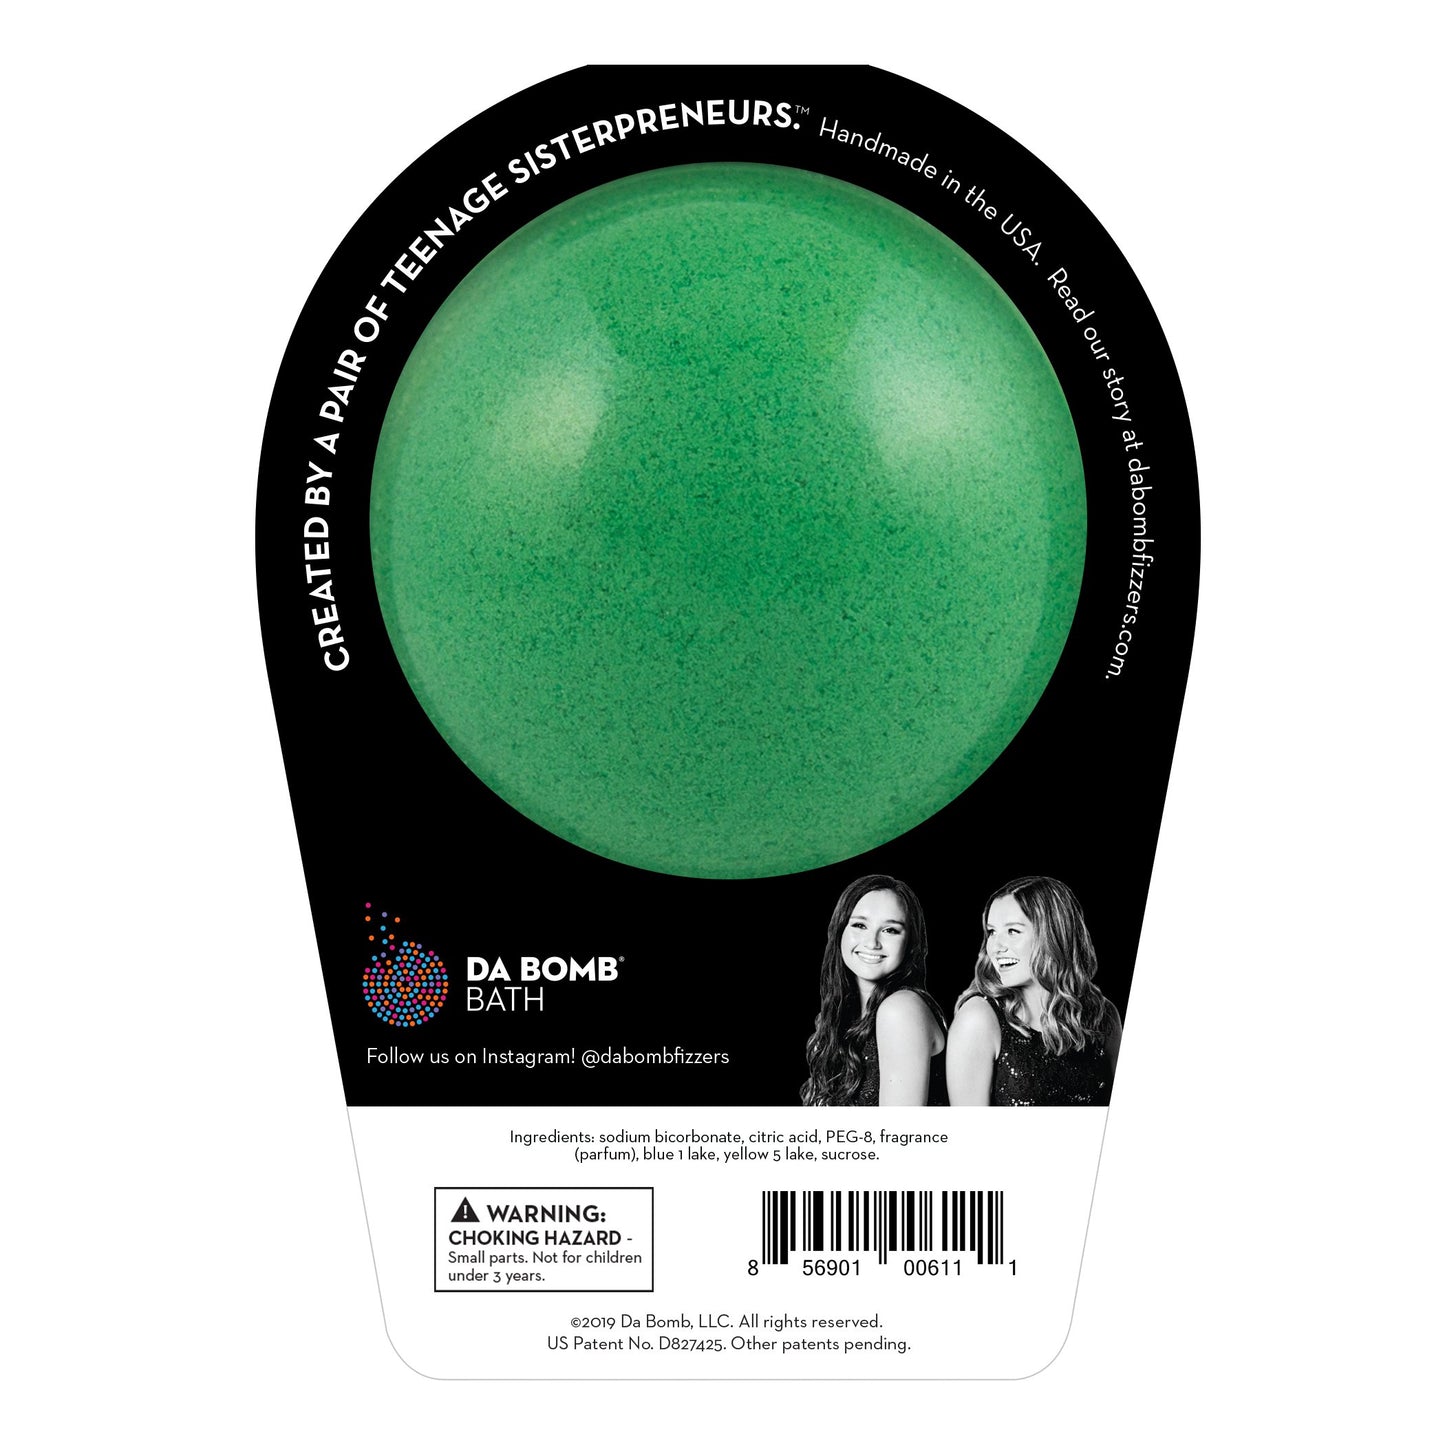 Back of the Jingle bath bomb in black packaging. Bath bomb is green on the back.